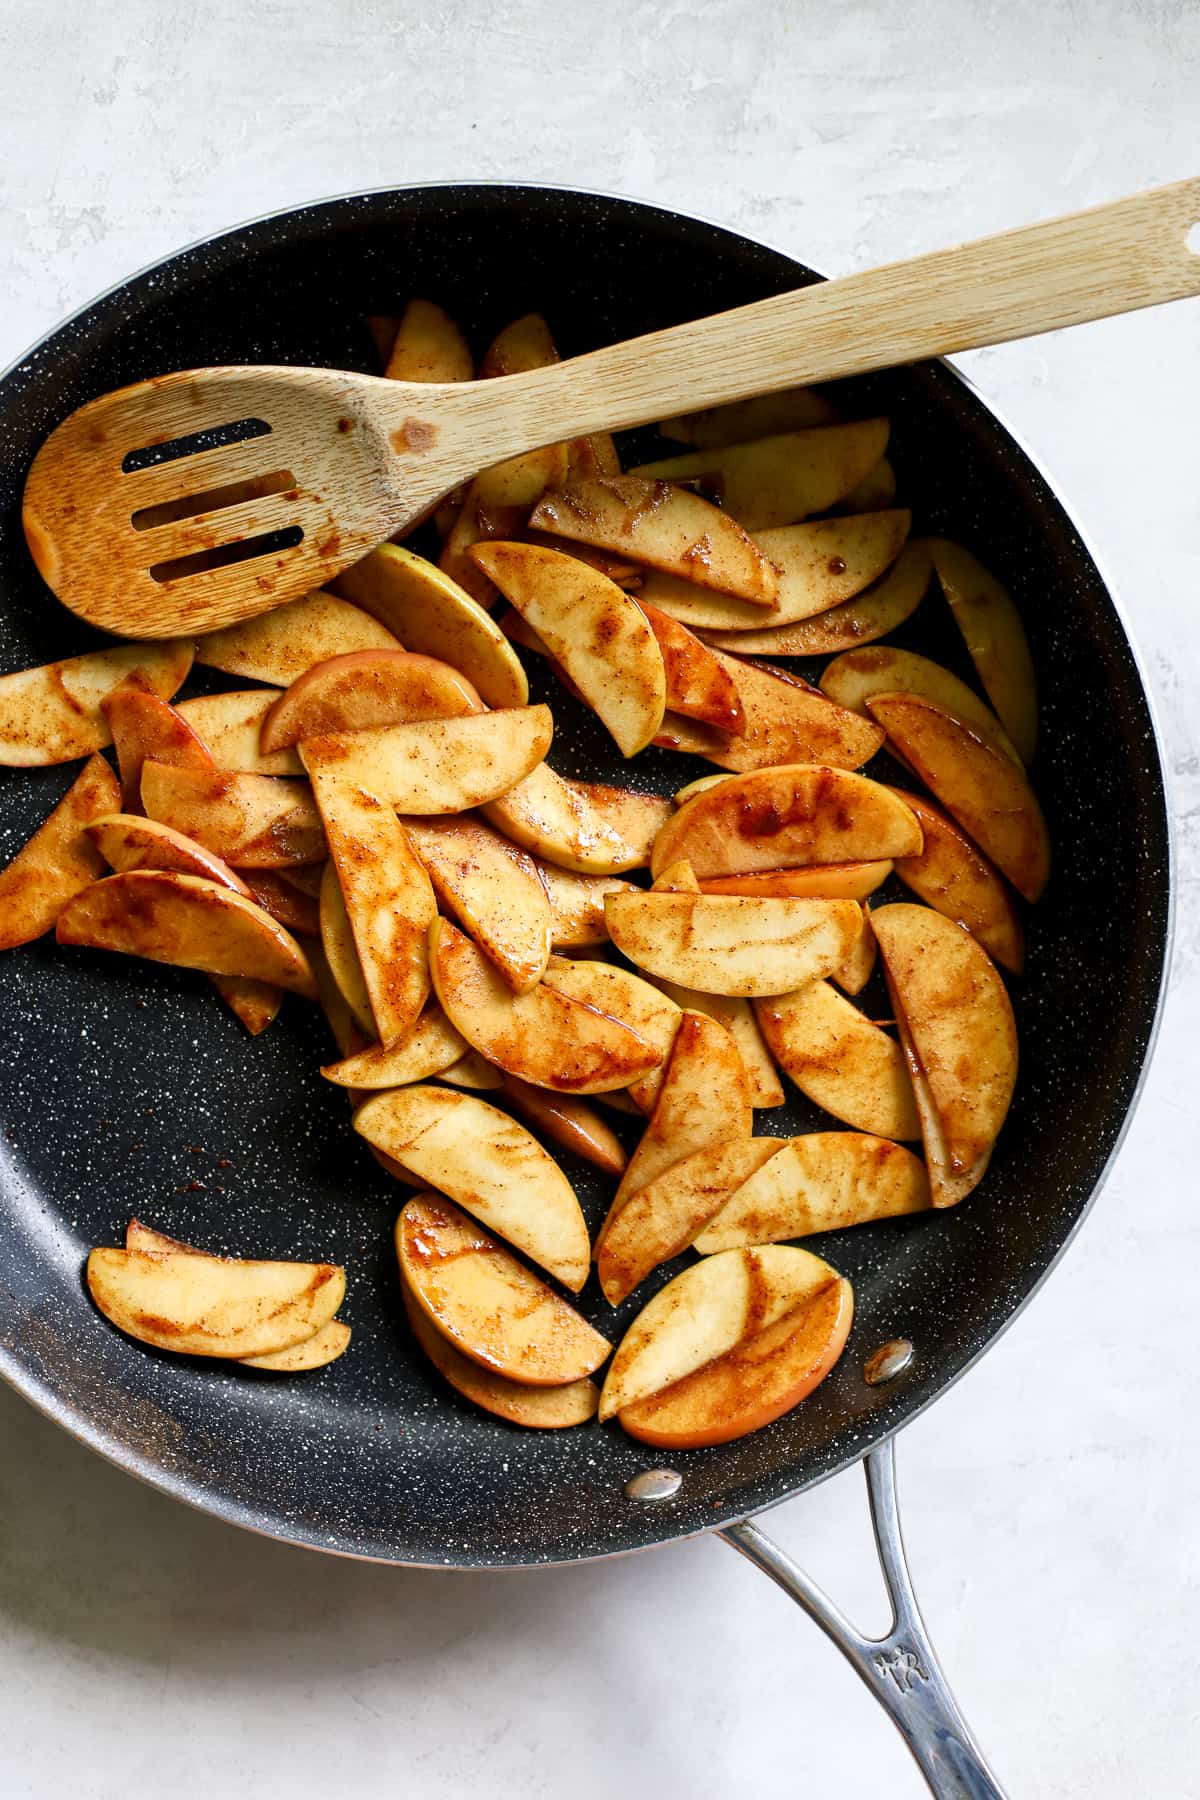 Simple sautéed apples in maple syrup and cinnamon, in black sauté pan with wooden spoon